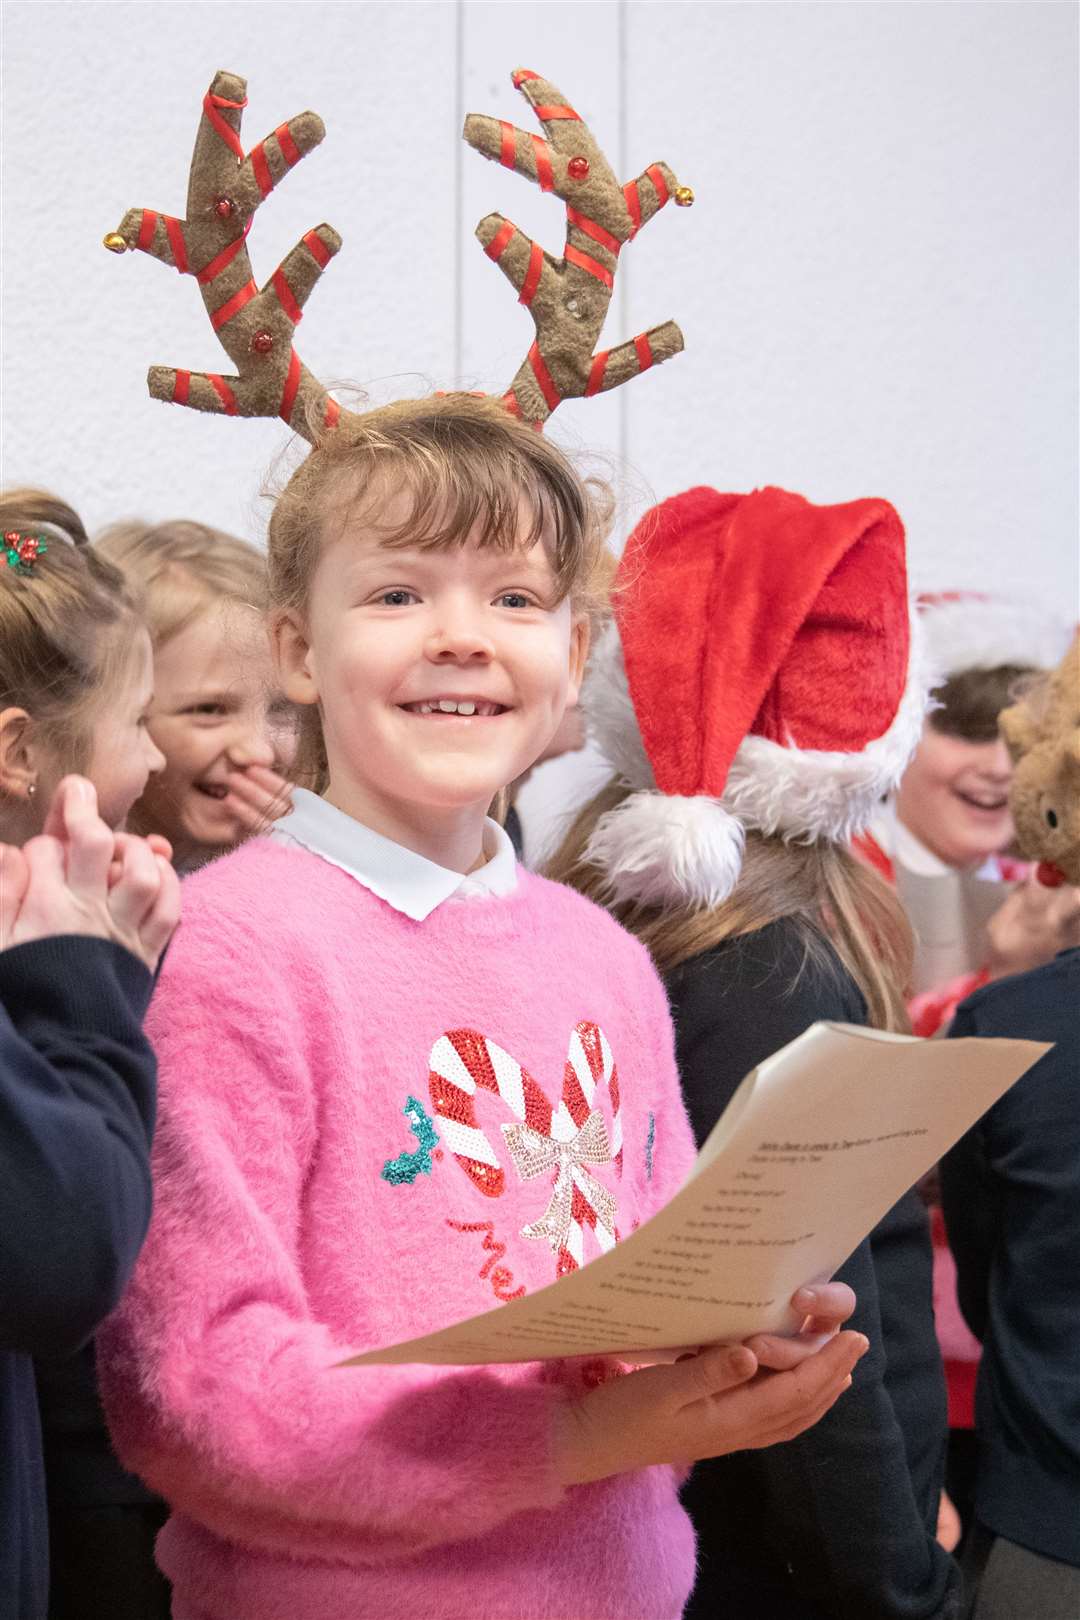 Anderson’s Primary School P3/4s sang carols in the community centre following the planting ceremony.